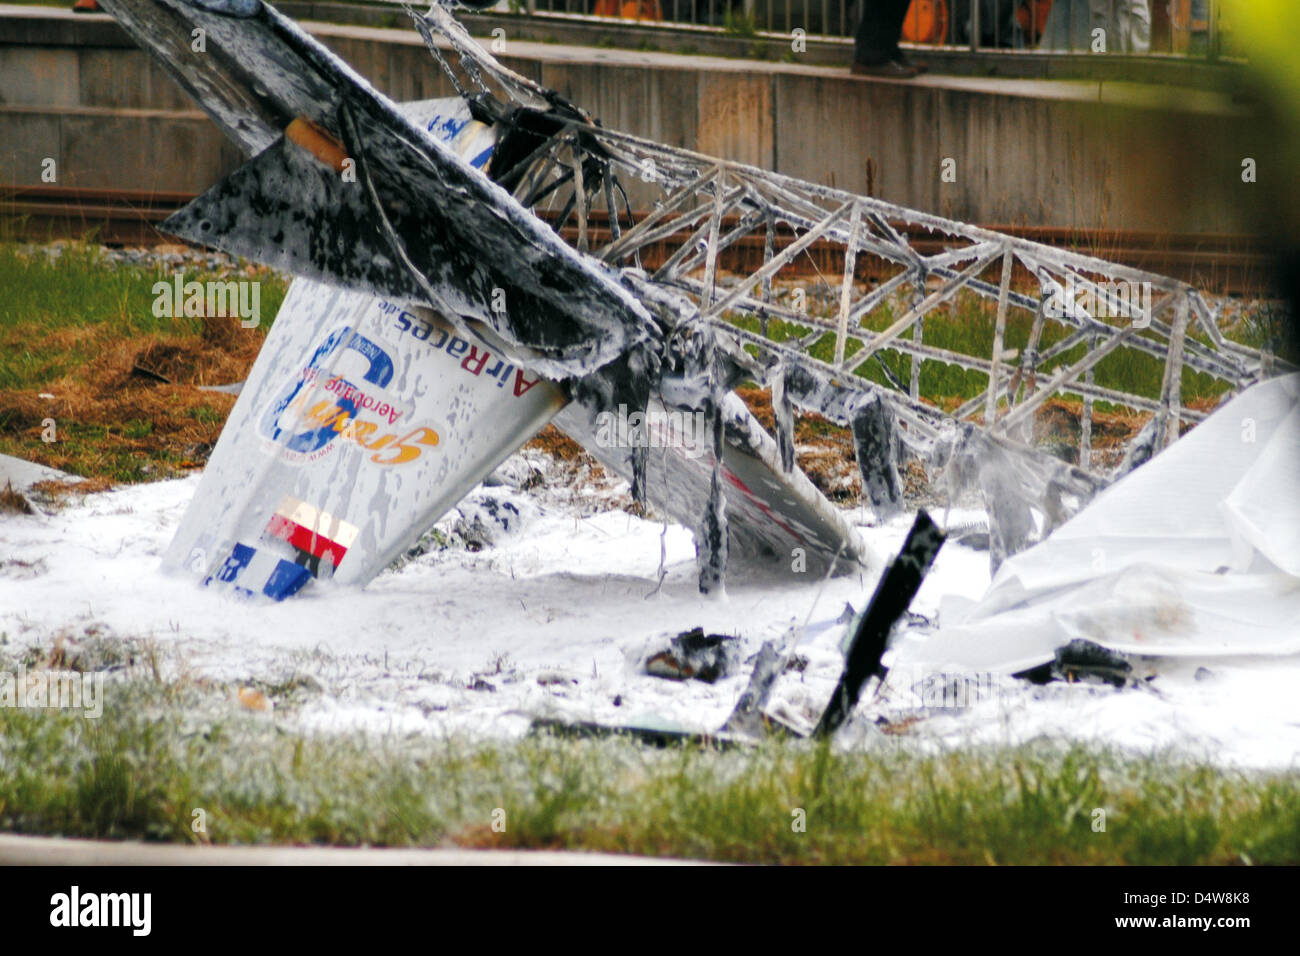 The burnt-out debris of an airplane that collided in the air during an air show in Warngau, Germany, 18 September 2010. A pilot was killed in a mid-air collision at a German air show, police said. One of the two planes in the collision remained airborne, but the other crashed and burned, killing its pilot, in the accident at Warngau. Photo: STR Stock Photo